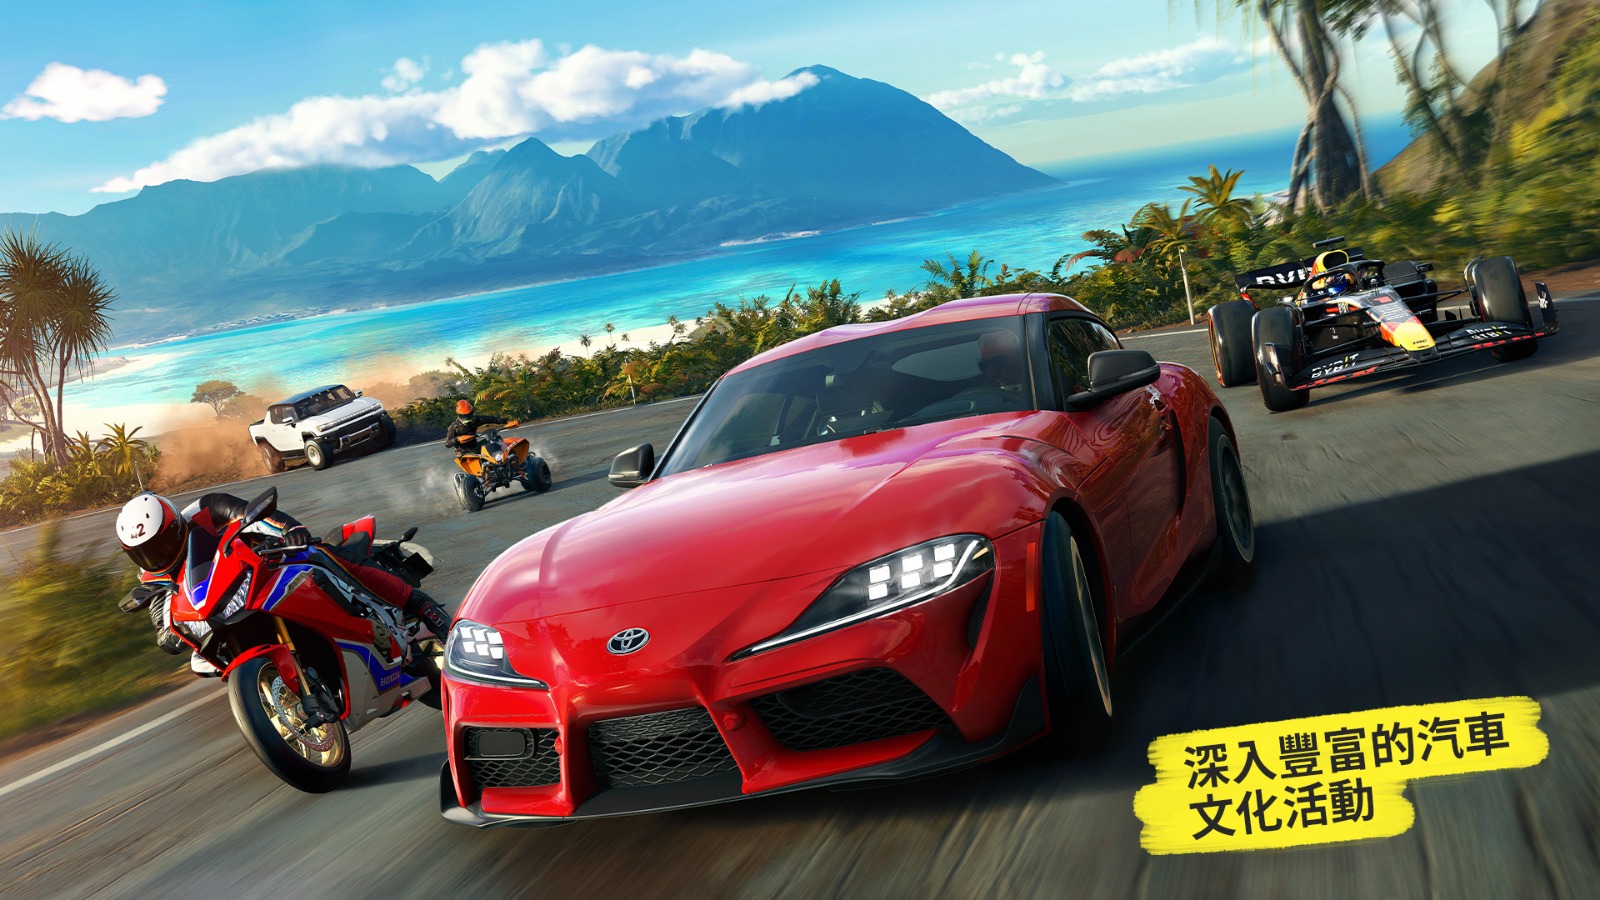 PS4 The Crew Motorfest Limited Edition (English/Chinese) * 飆酷車神 動力慶典 * –  HeavyArm Store